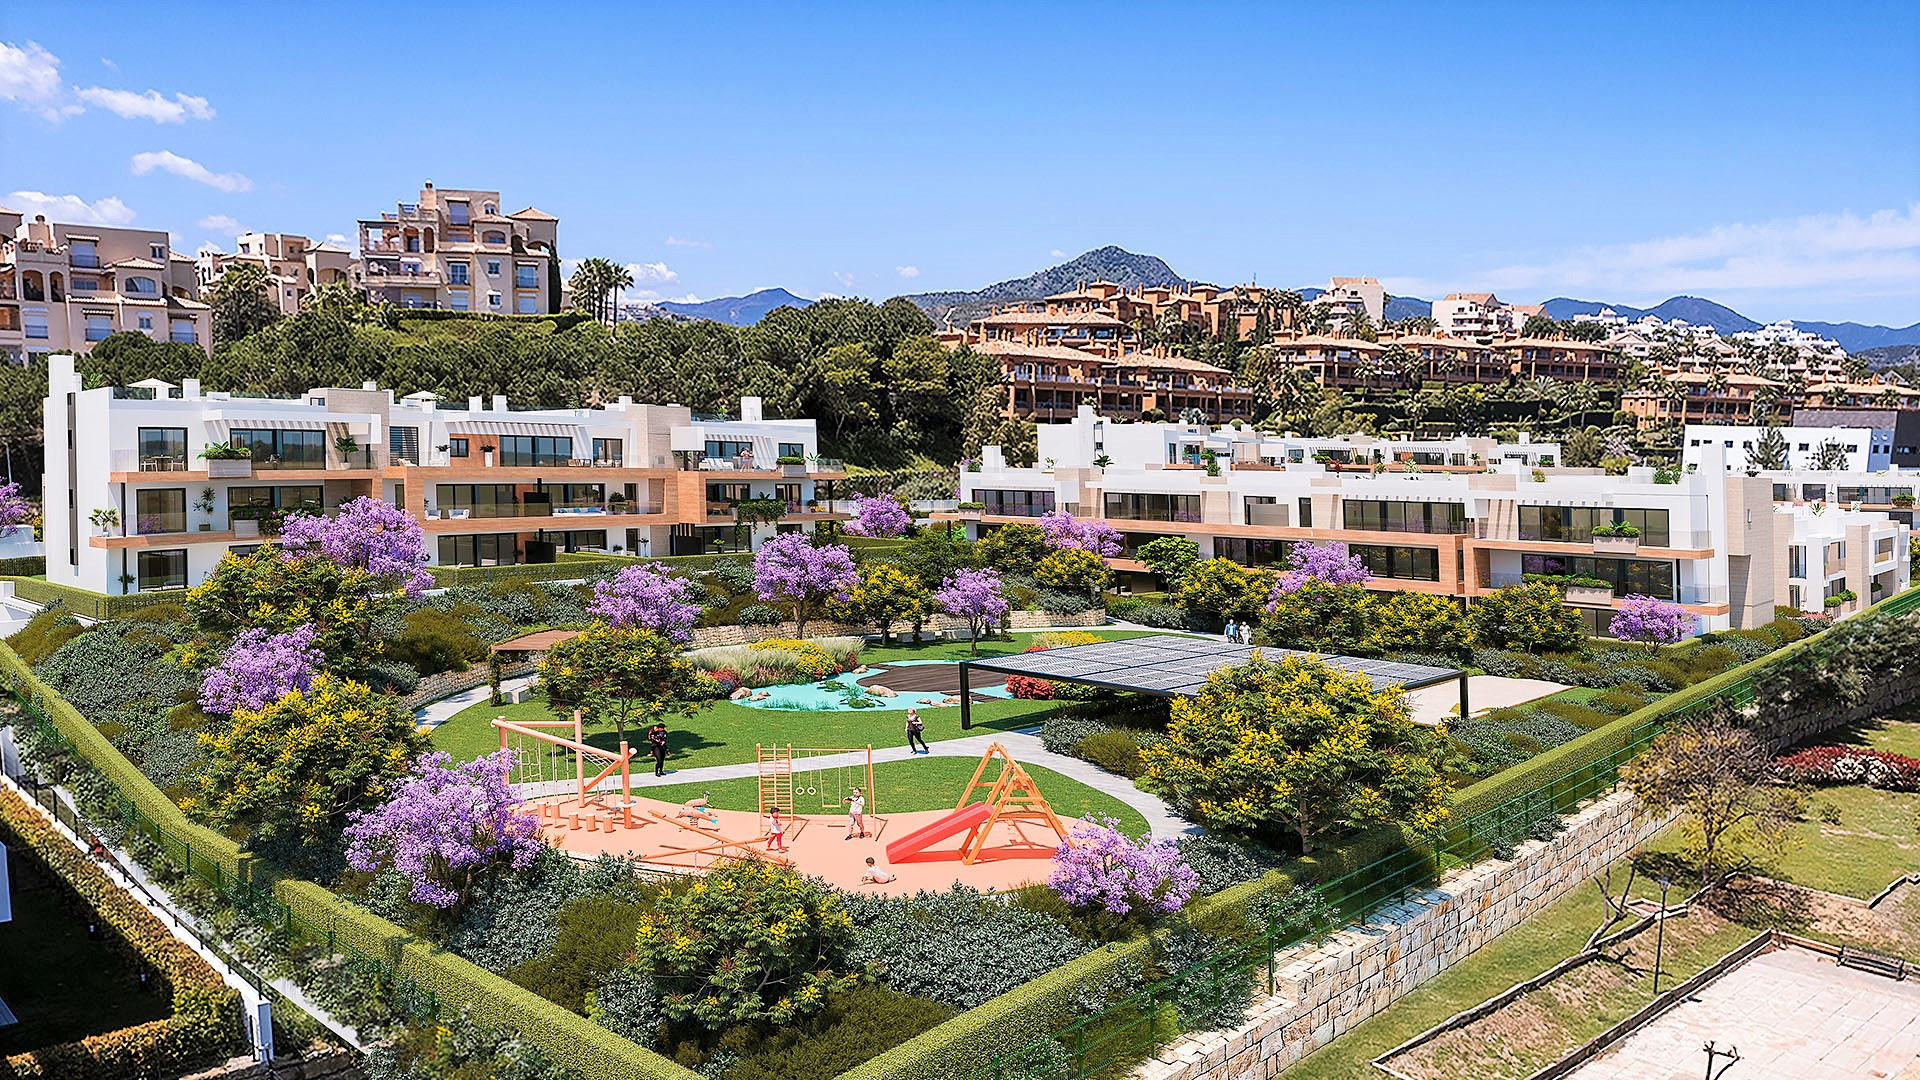 New complex of 63 apartments located in the privileged area of Atalaya, surrounded by golf courses and close to all services